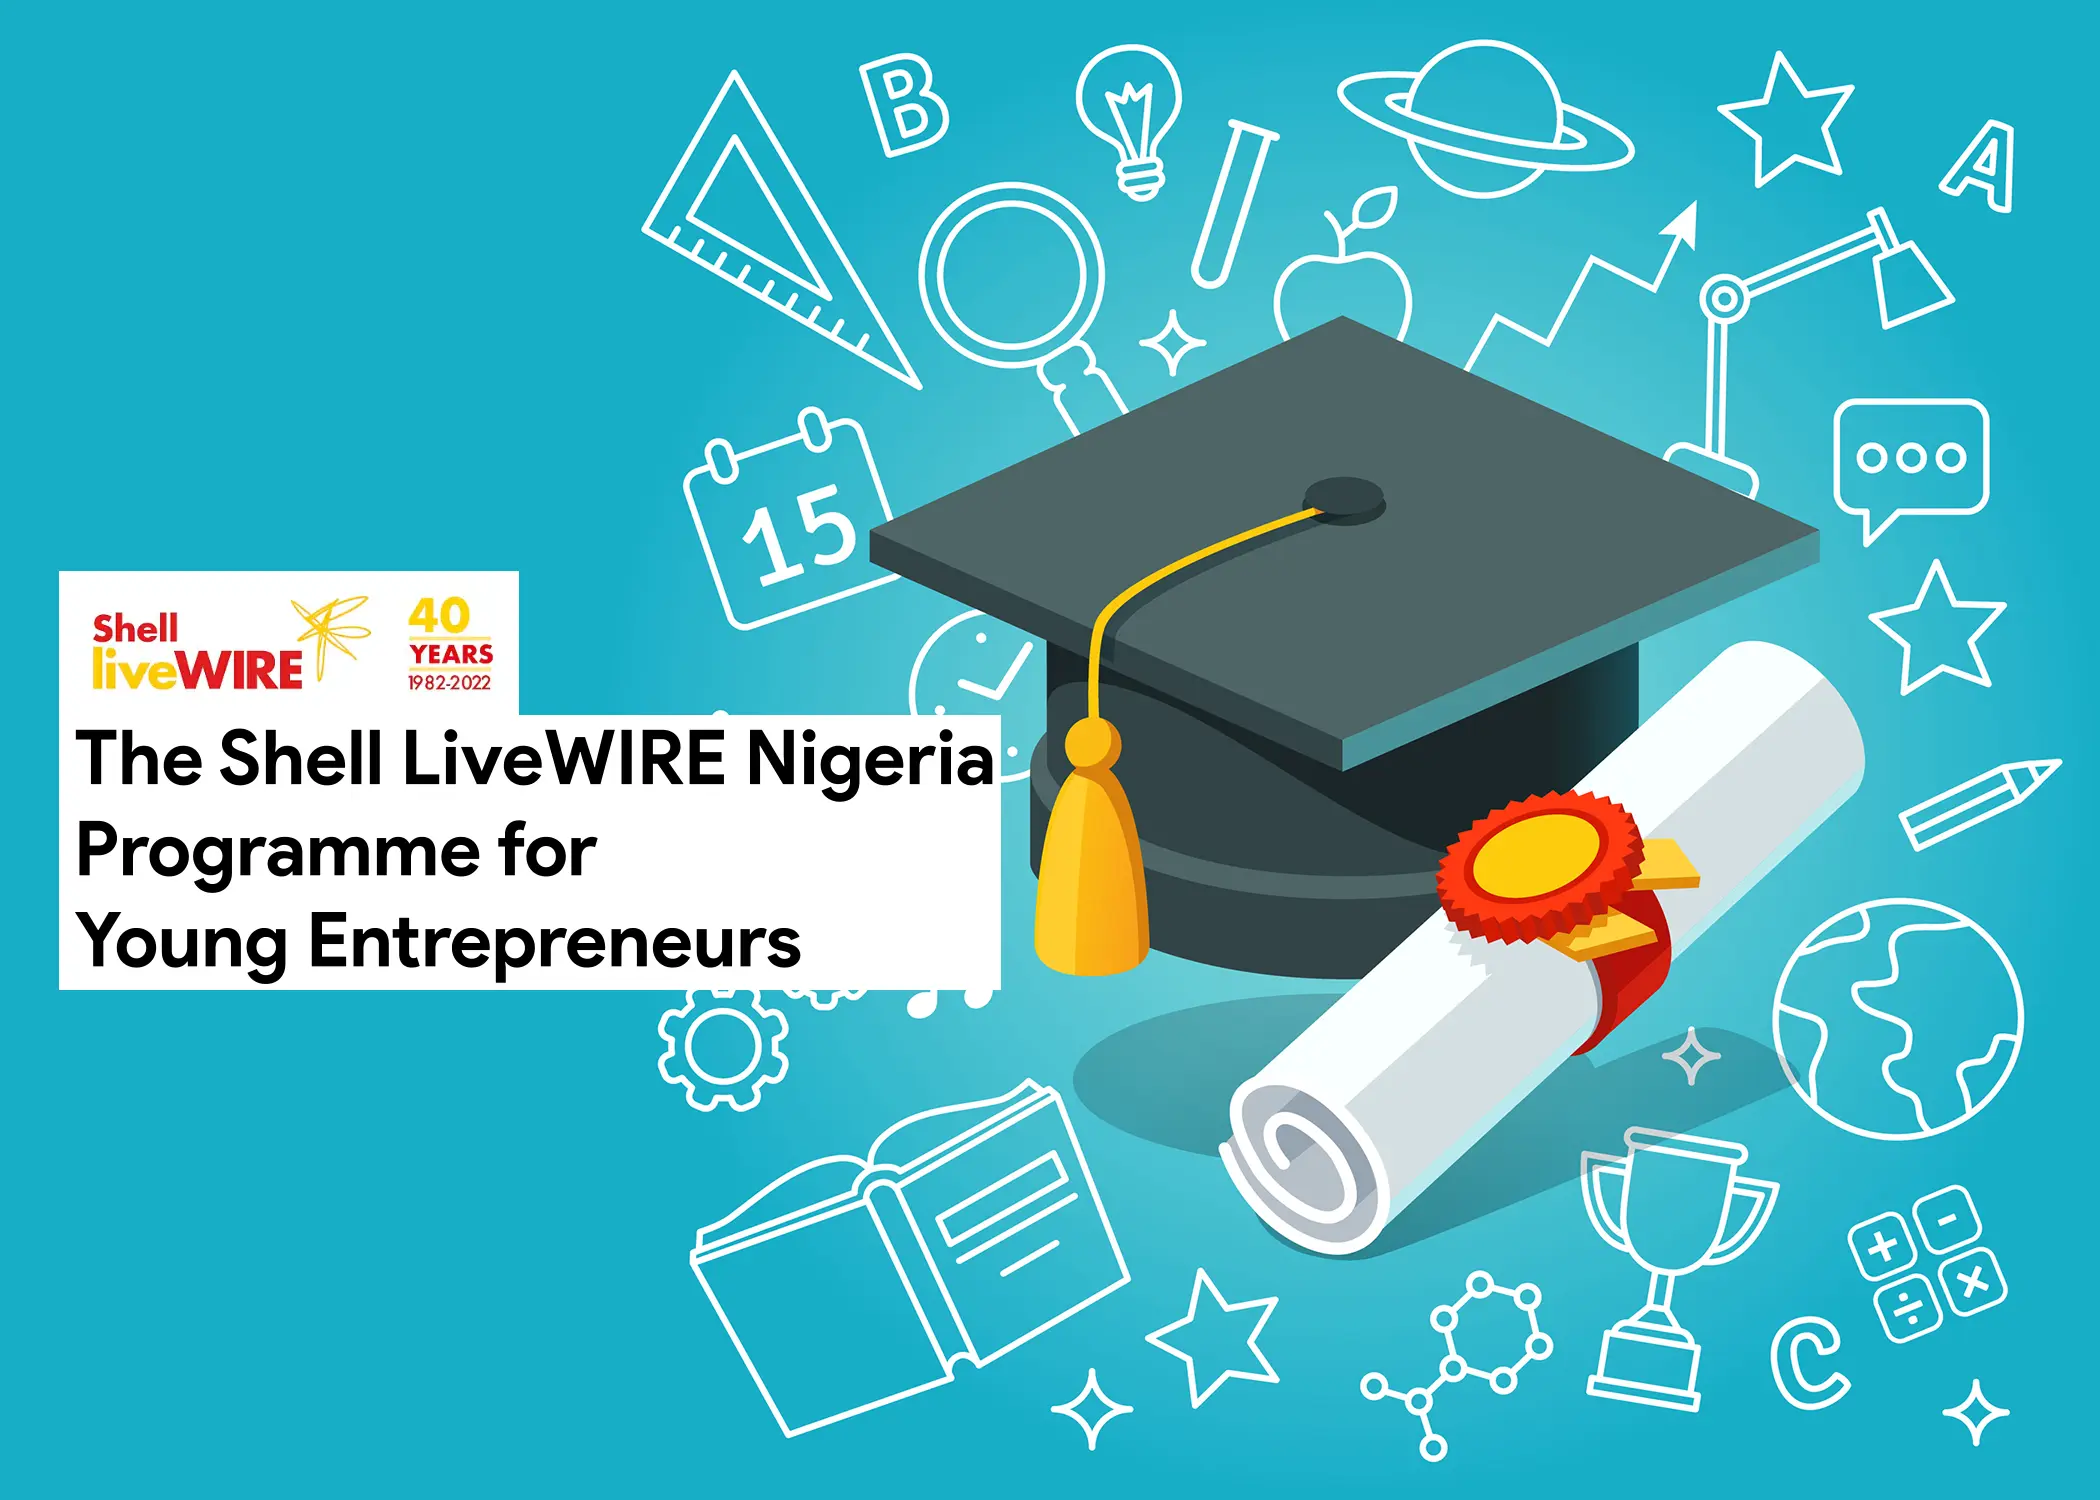 The Shell LiveWIRE Nigeria Programme for Young Entrepreneurs